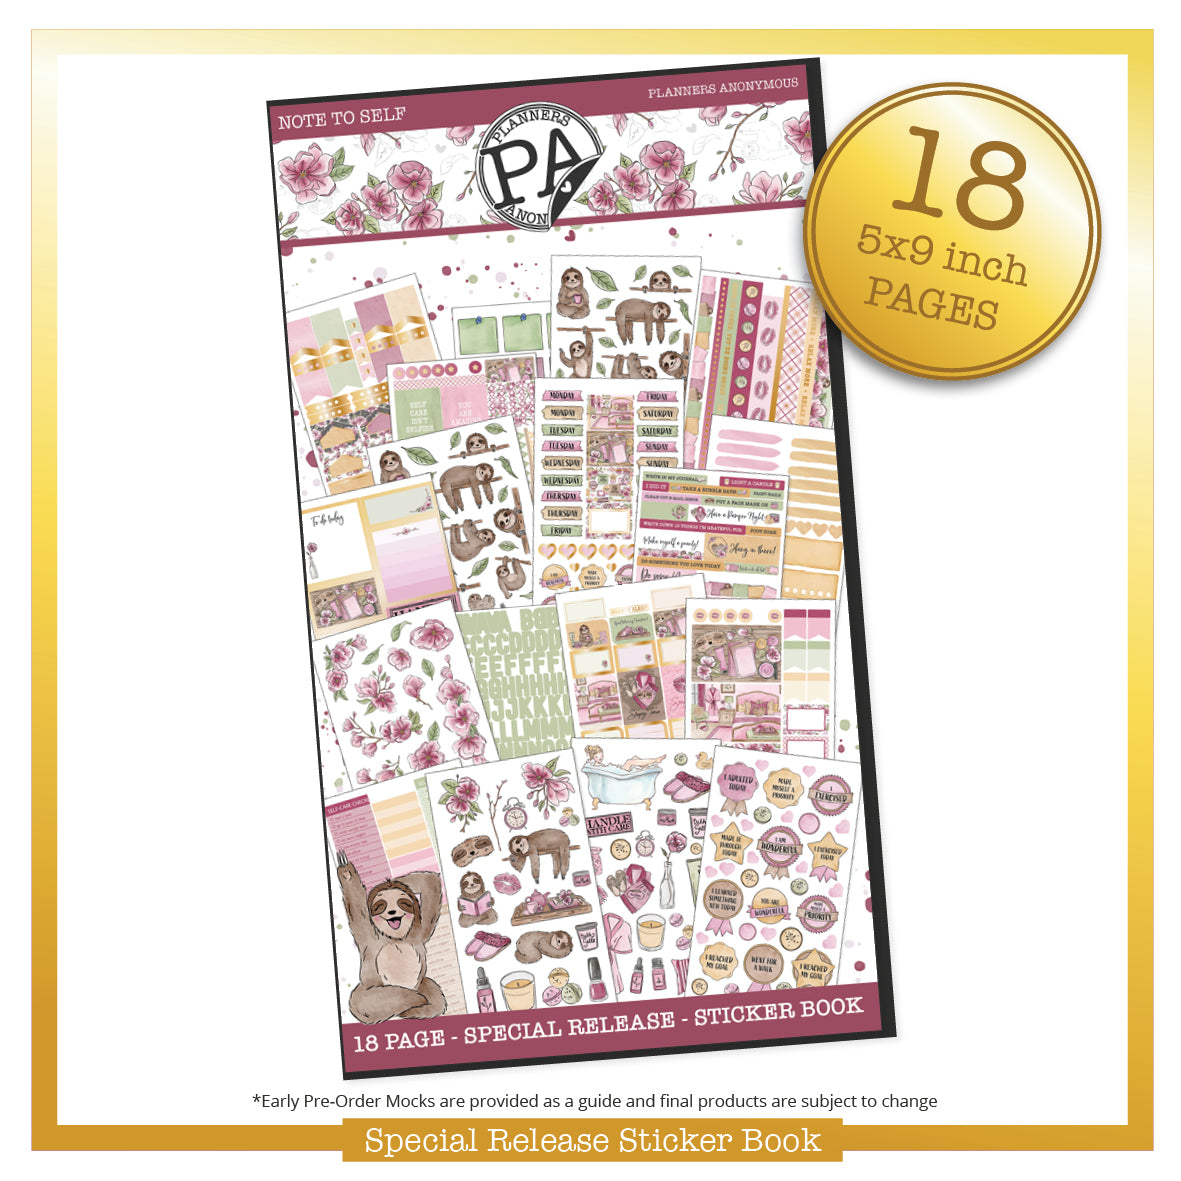 Washi Sticker Book 20 Pages With Hundreds of Pre-cut Vintage